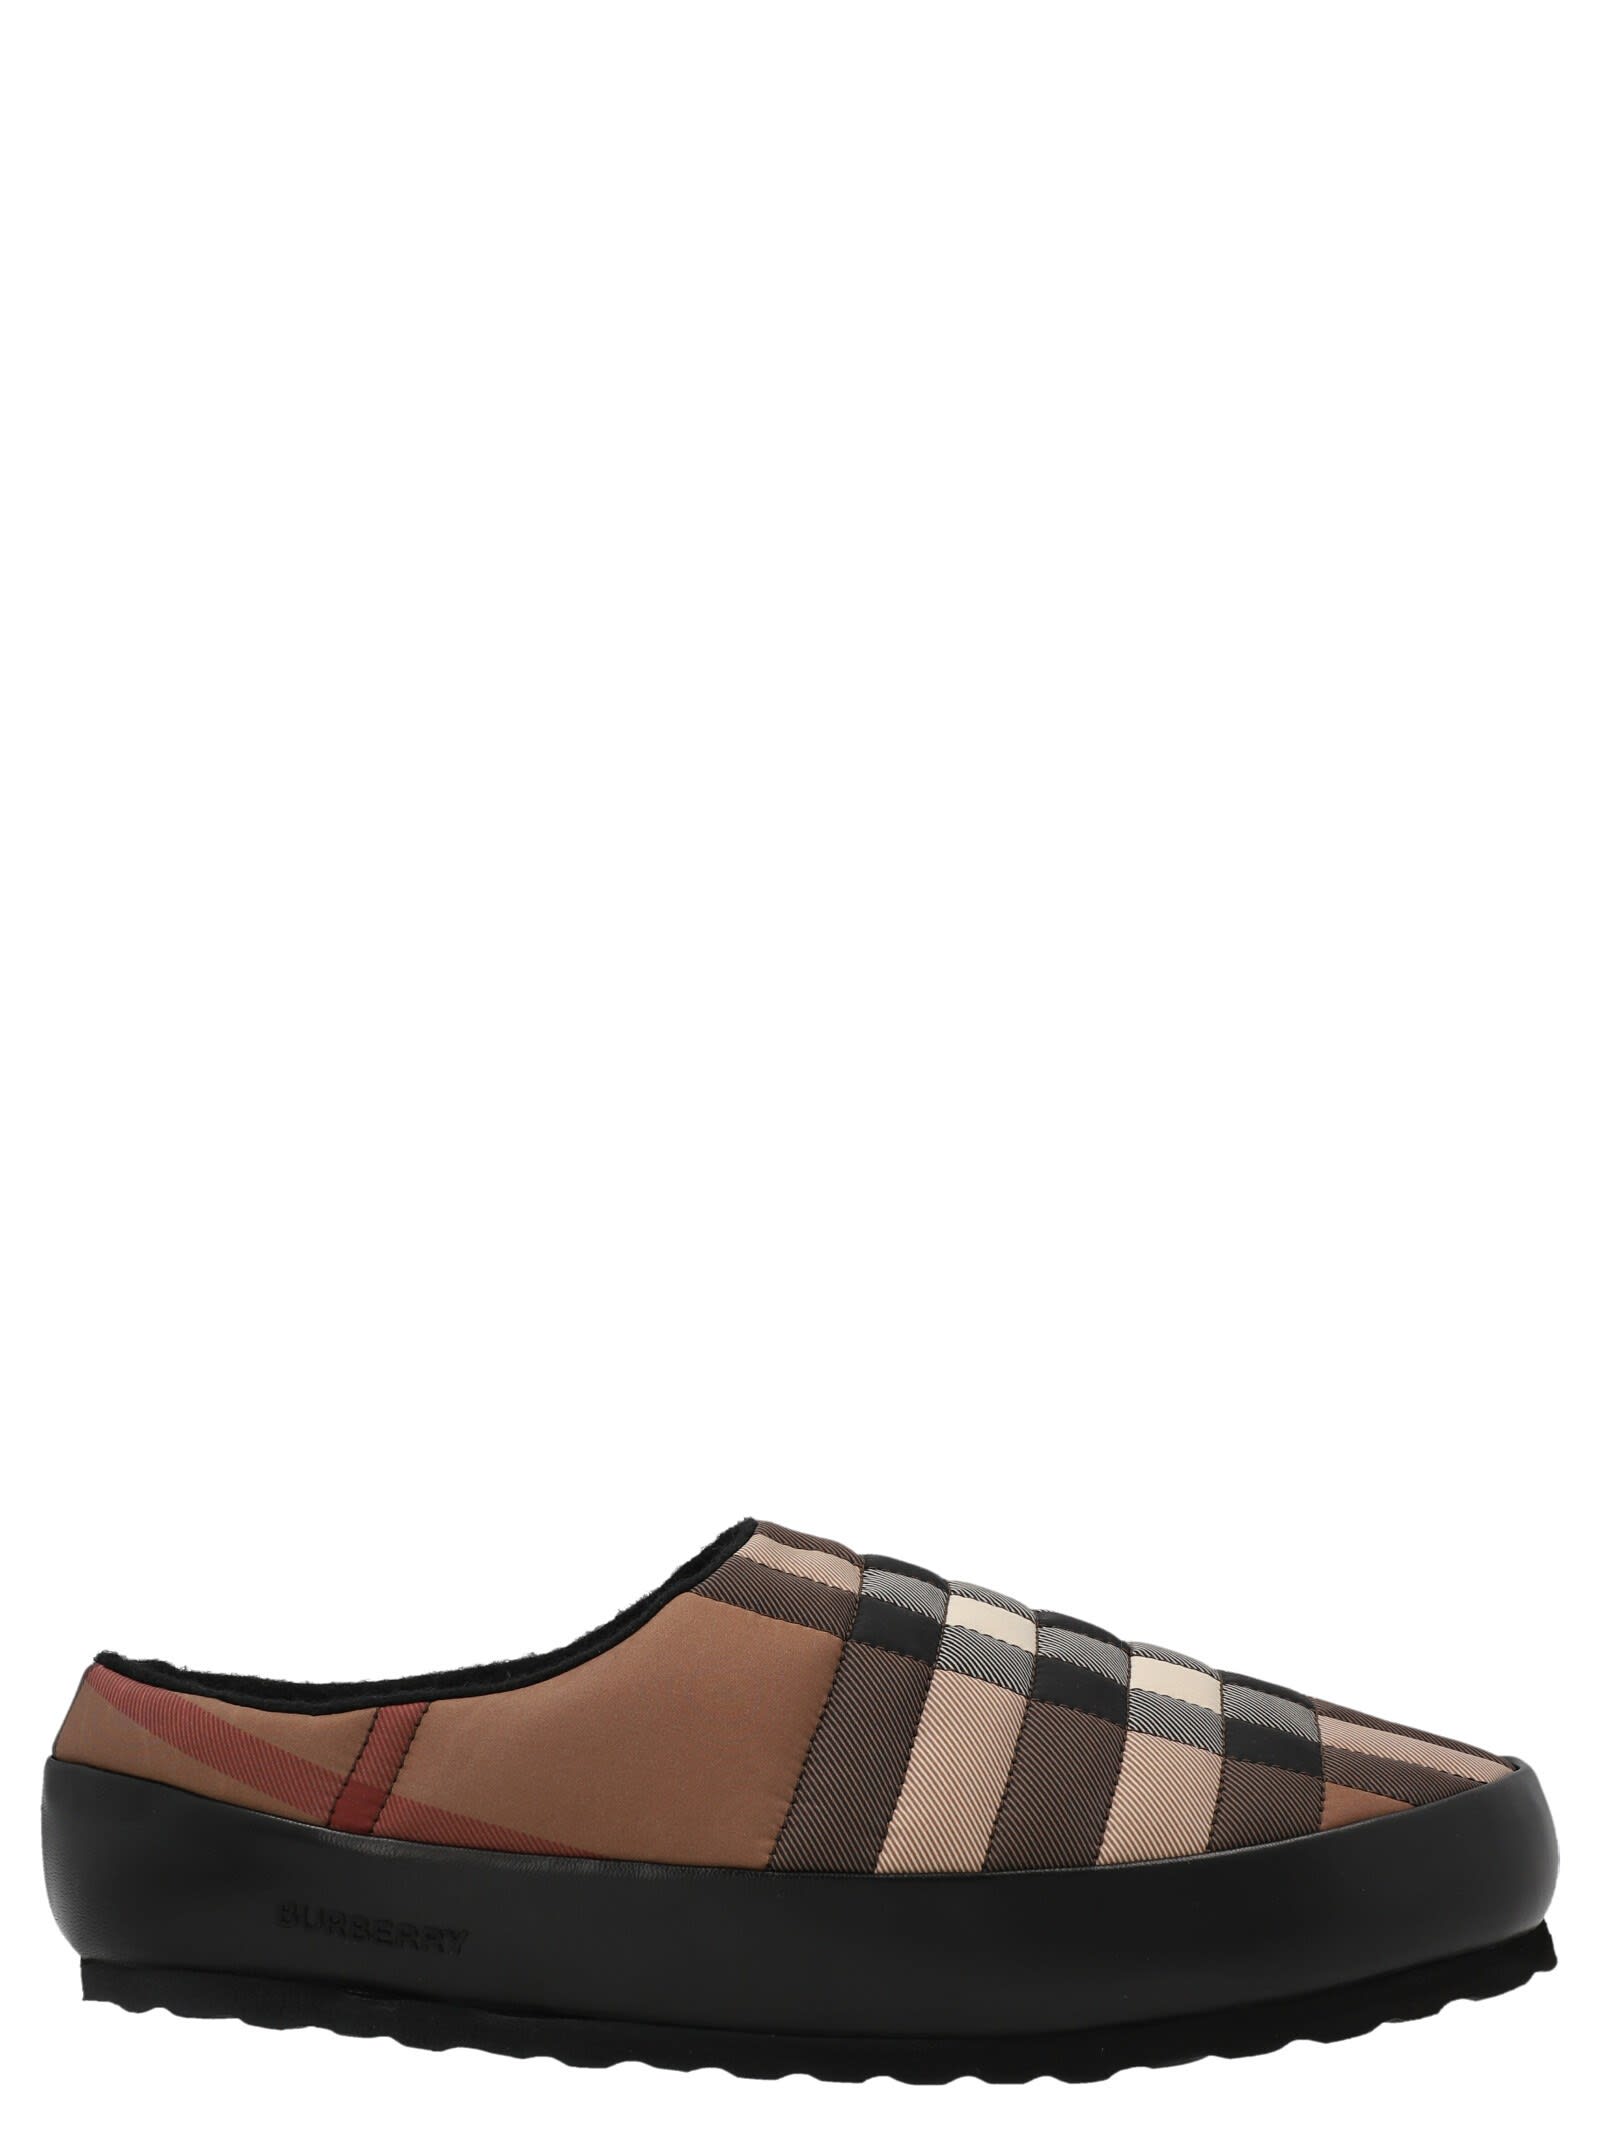 BURBERRY CHECK SLIPPERS